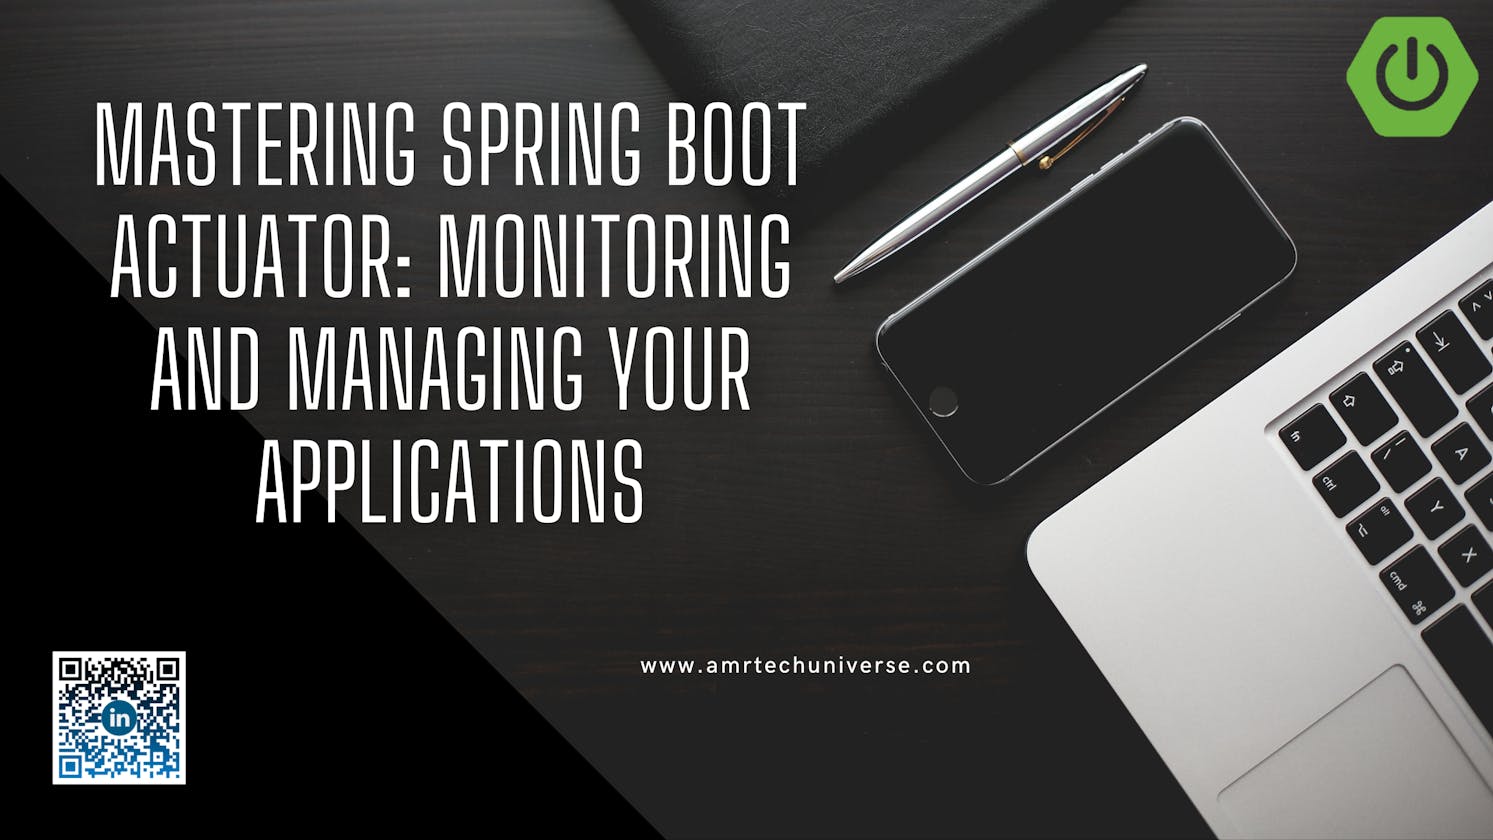 Mastering Spring Boot Actuator: Monitoring and Managing Your Applications